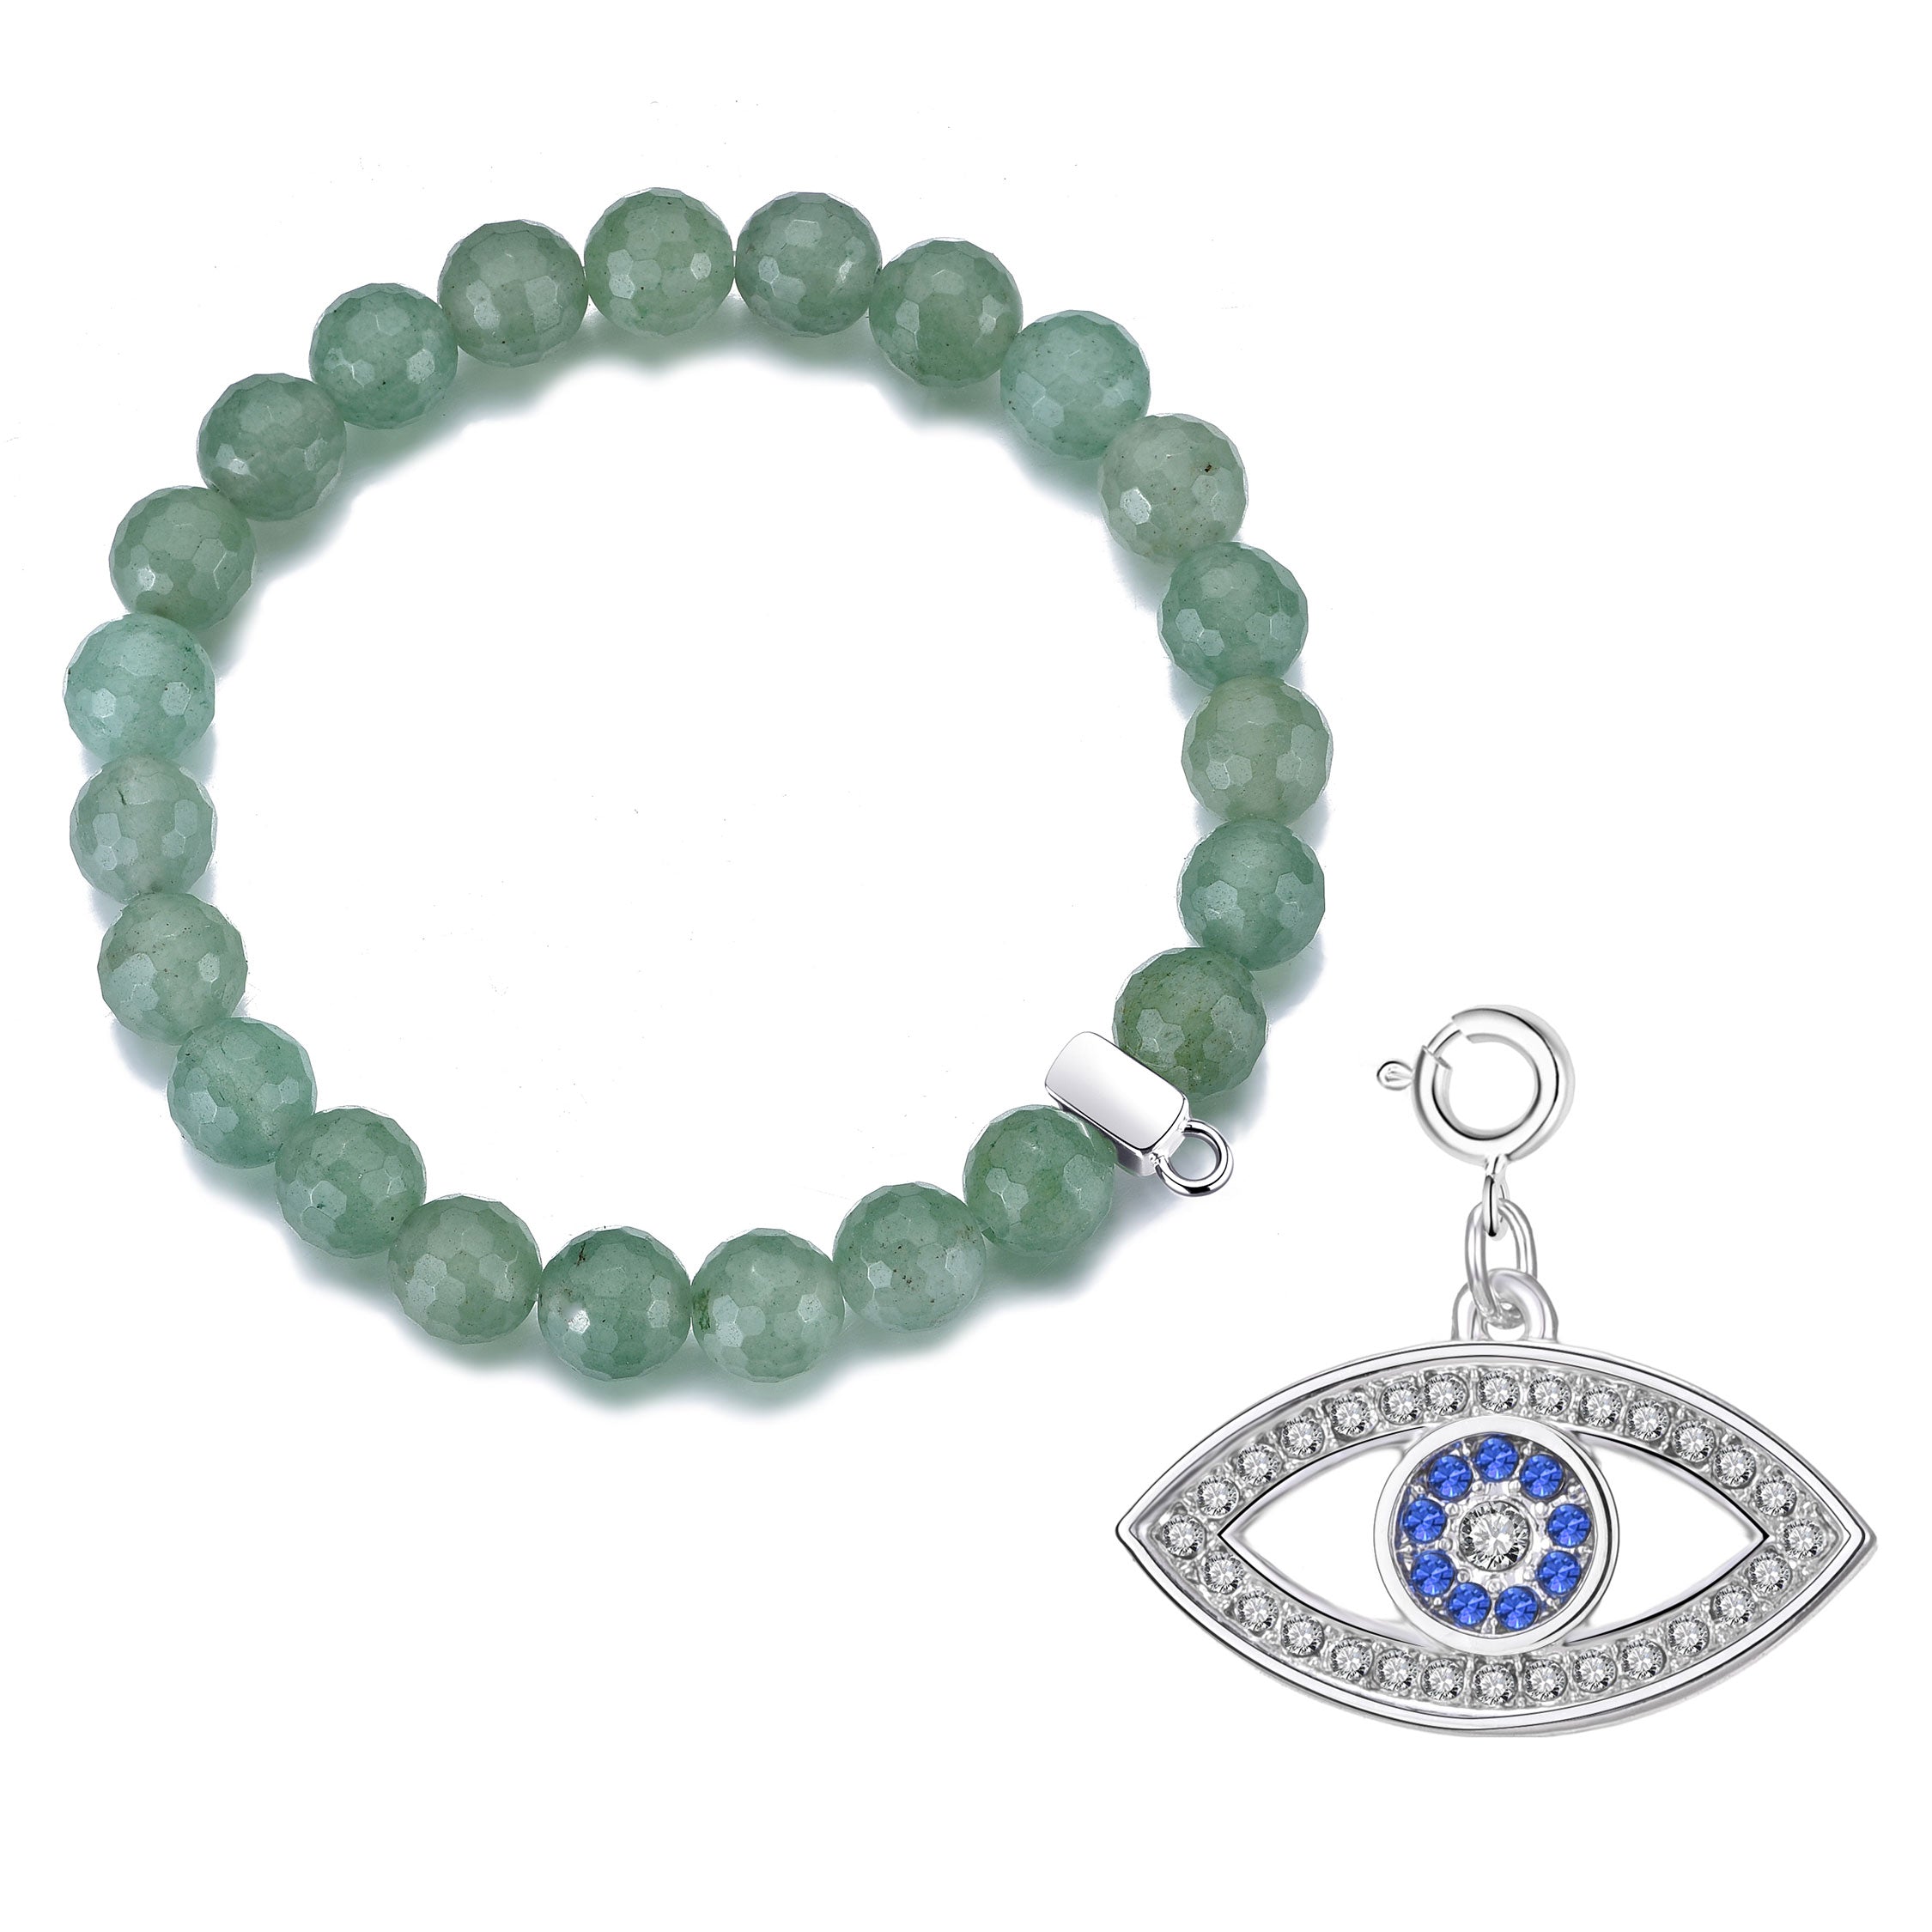 Faceted Green Aventurine Gemstone Bracelet with Charm Created with Zircondia® Crystals